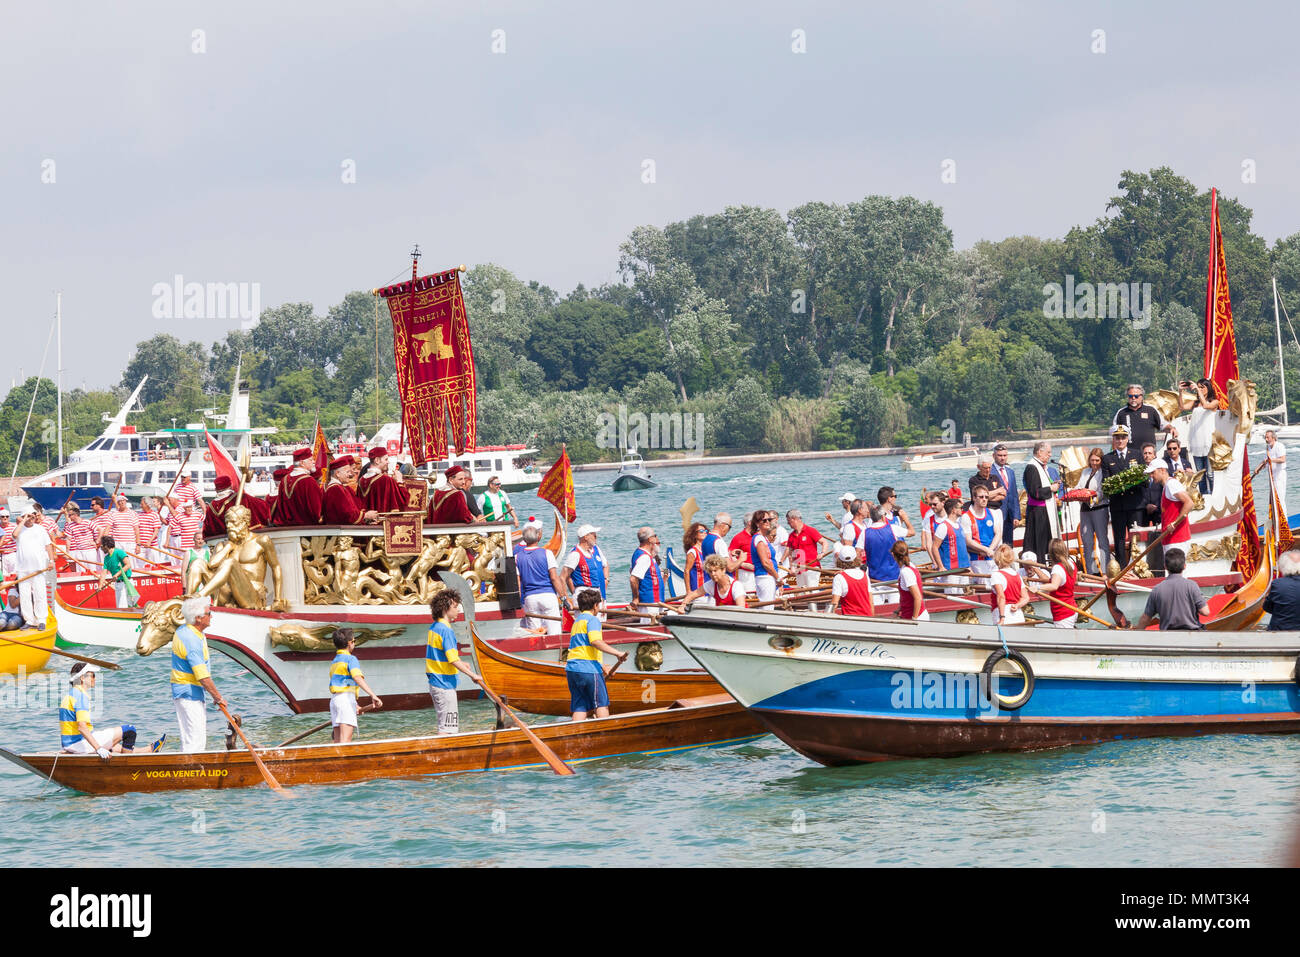 Venice, Veneto, Italy.  13th May 2018.  The cortege or corteo  of rowers in the boats accompanying the Serenissama ceremonial boat during Festa de la Sensa with the dignatories Mayor Brugnaro, the Head of the Navy and Patriarch of Venice,  at Lido during the ceremony for the blessing of the gold ring by the Patriach  which is then tossed into the lagoon marrying Venice to the sea. Credit Mary Clarke/Alamy Live News Stock Photo